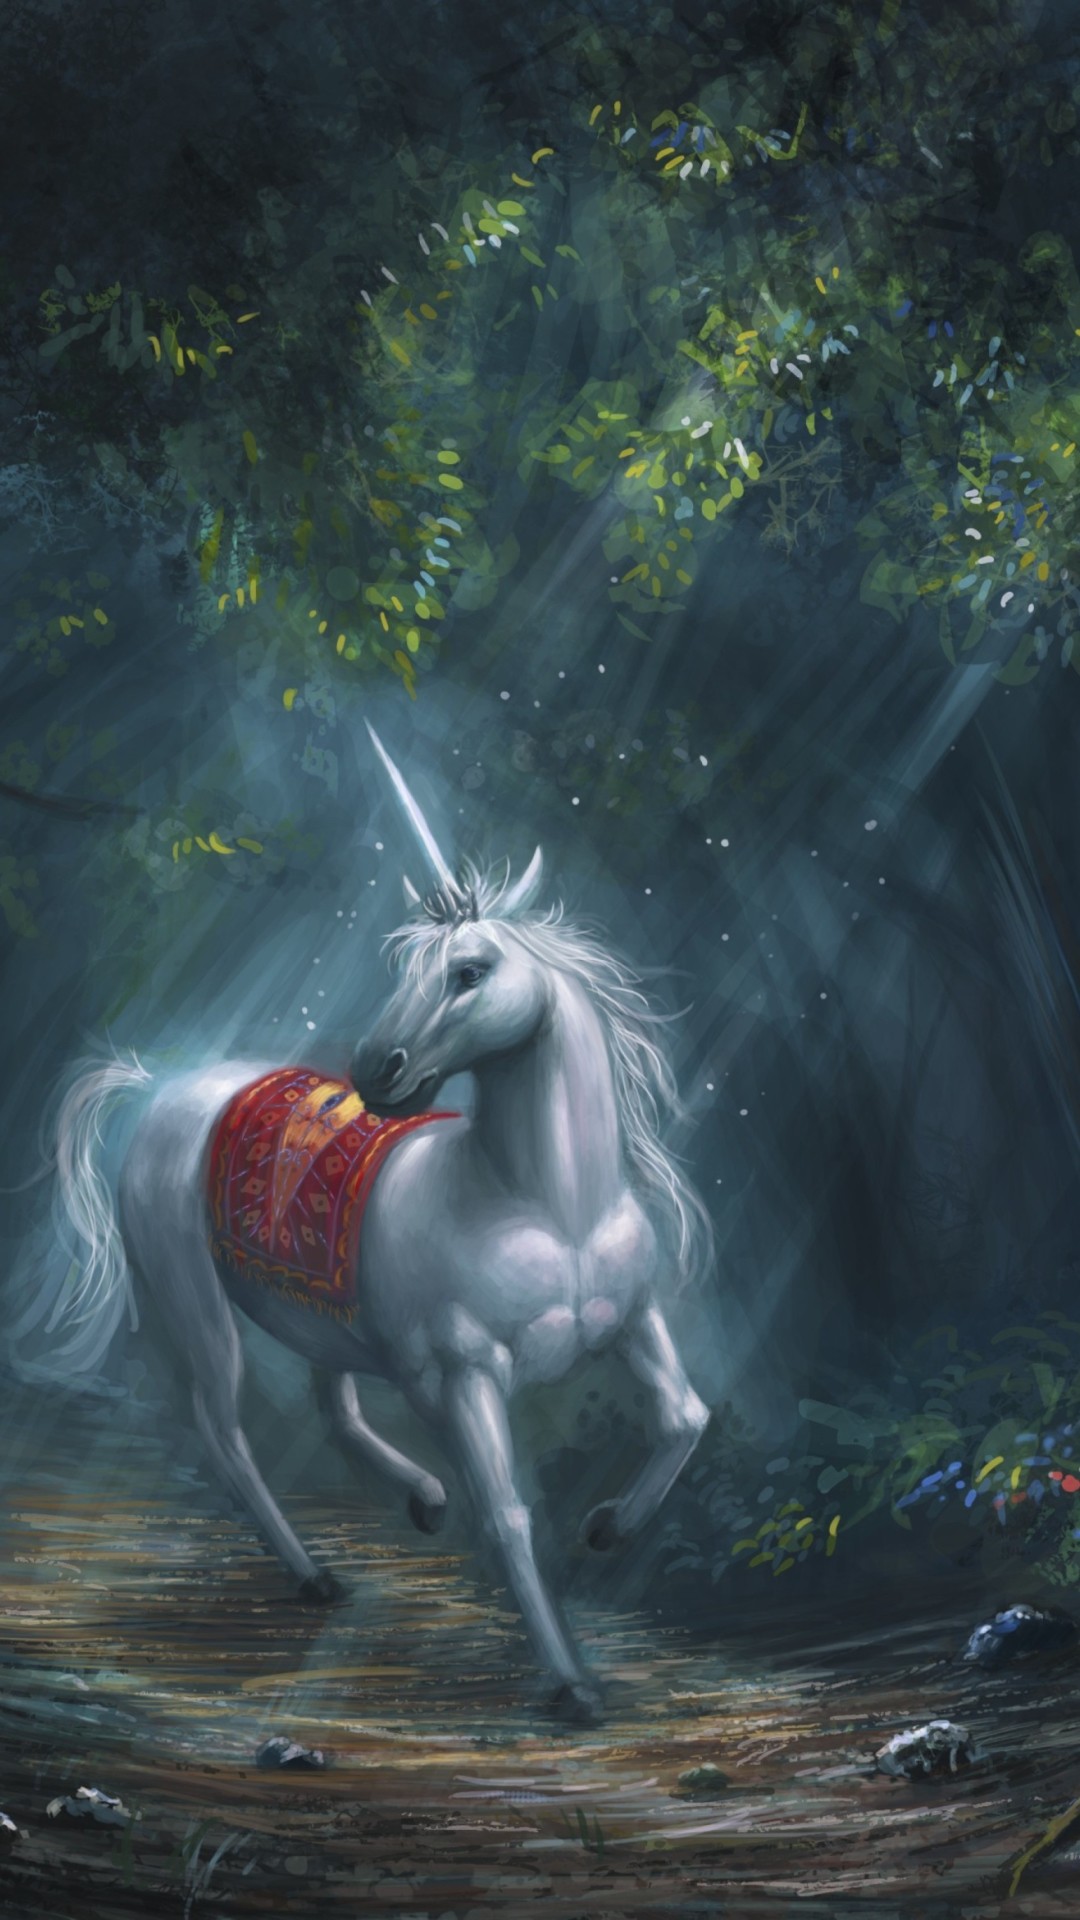 Download - Magical Unicorn In Forest , HD Wallpaper & Backgrounds